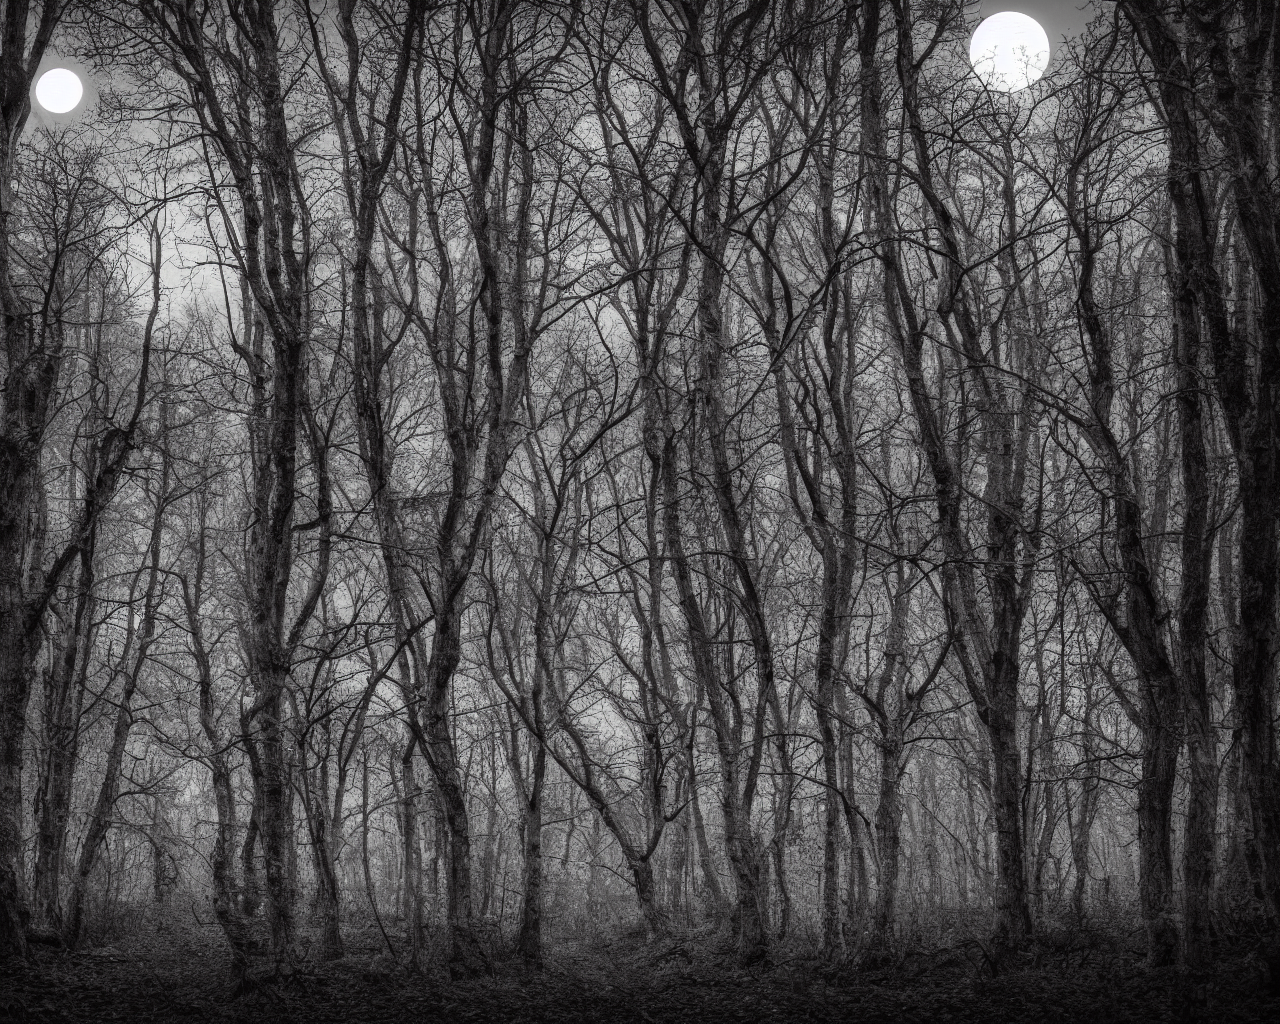 00025-13-nikon_d8102C_spooky_haunted_forest_at_night_under_a_full_moon2C_ghost.png